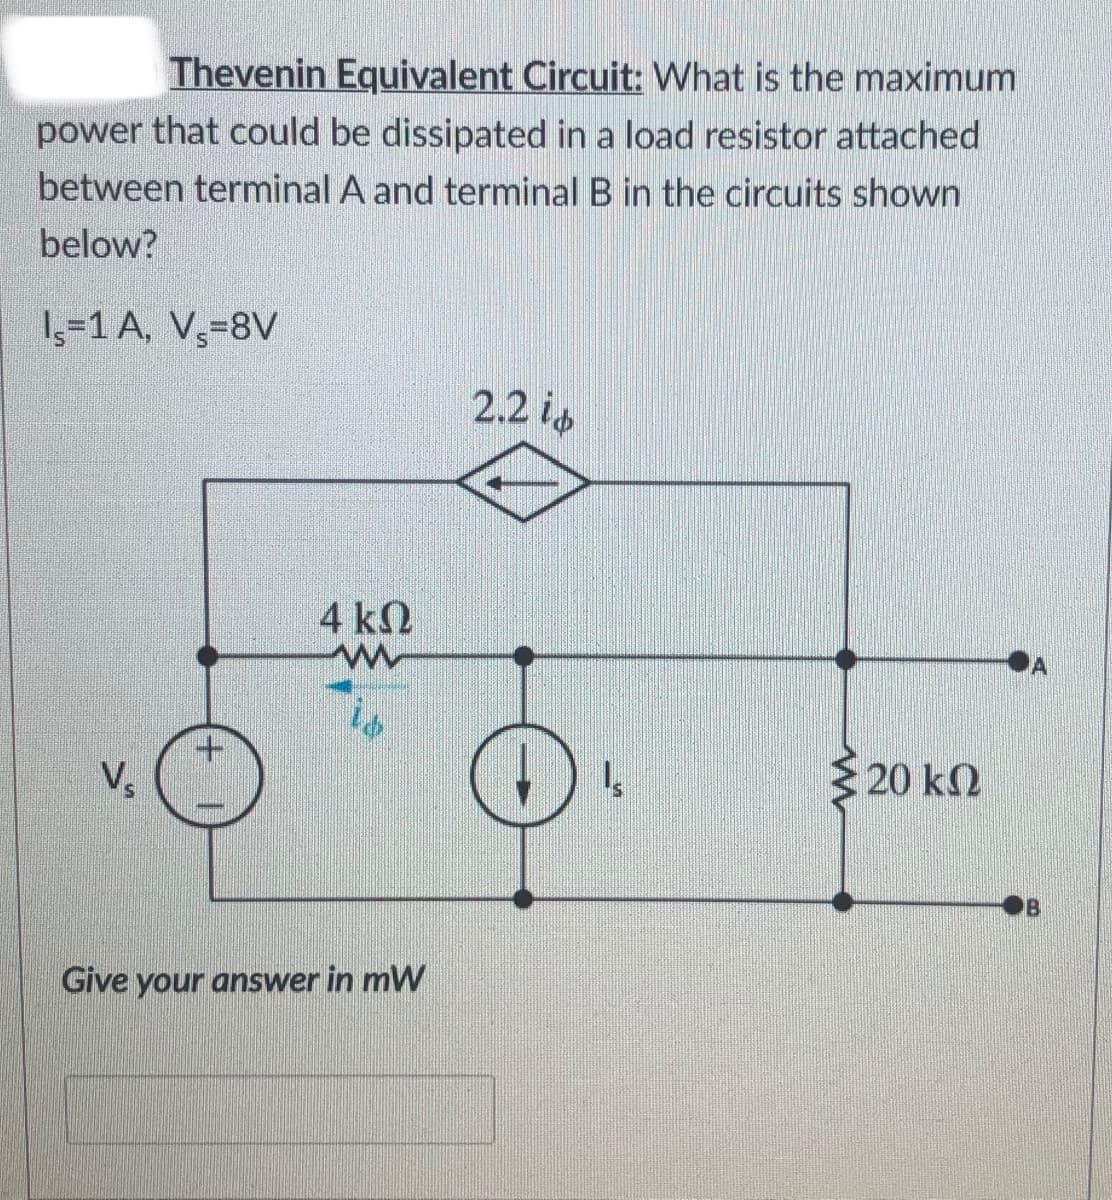 Thevenin Equivalent Circuit: What is the maximum
power that could be dissipated in a load resistor attached
between terminal A and terminal B in the circuits shown
below?
1,-1 A, V,=8V
2.2 is
4 k2
is
20 kN
Vs
Give your answer in mW
